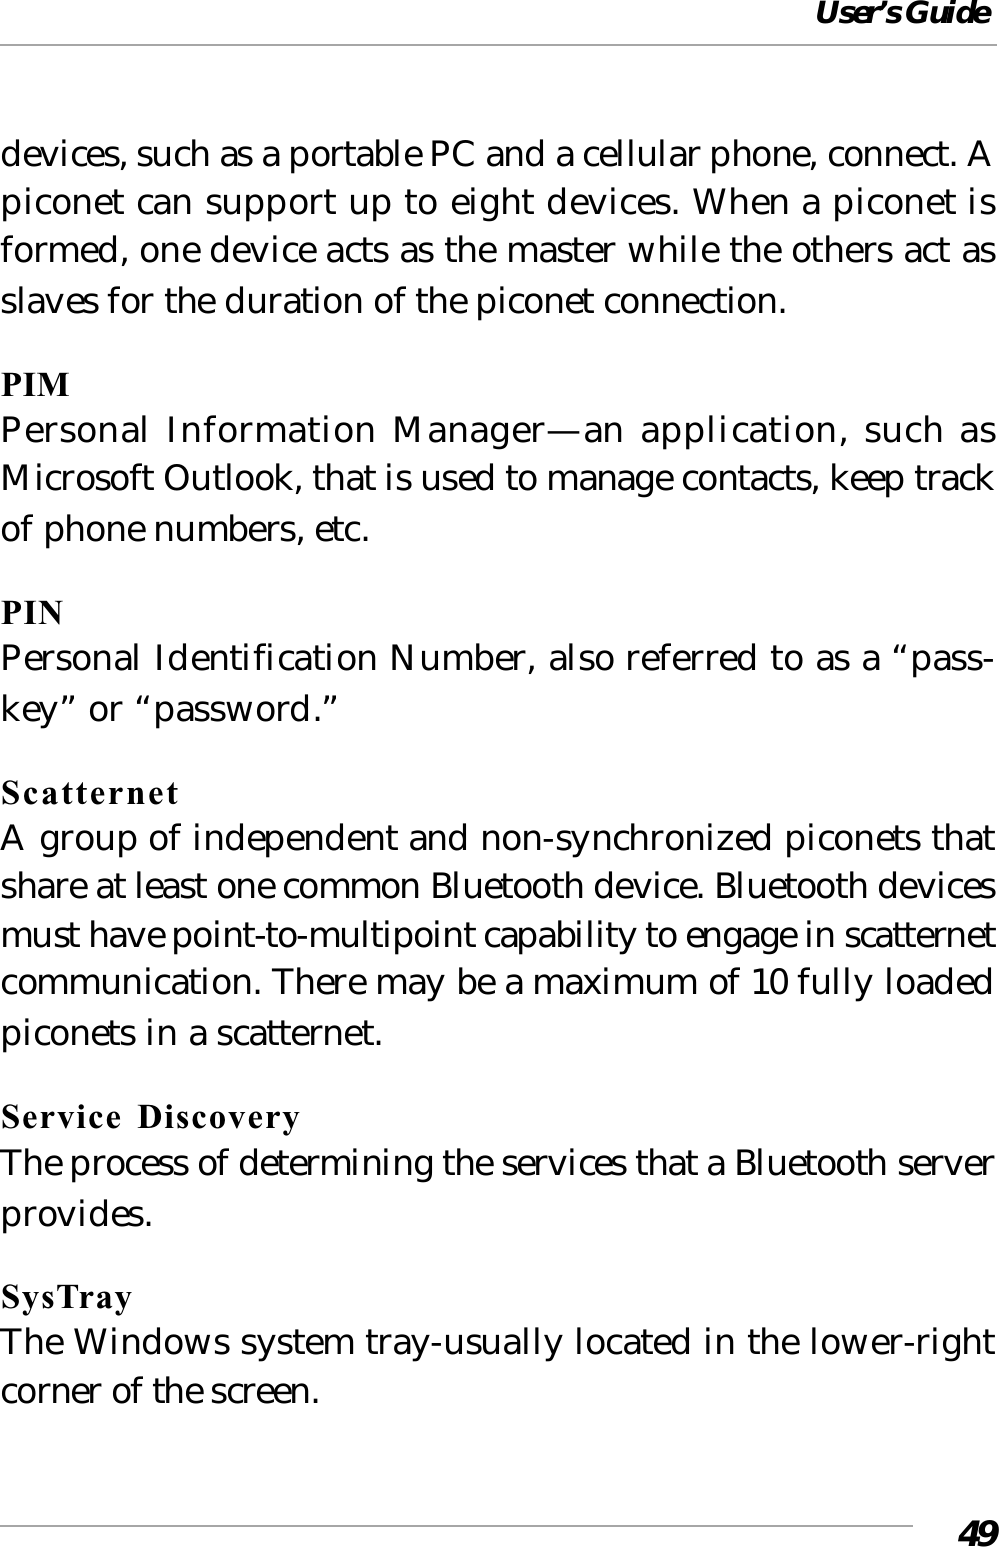 User’s Guide49devices, such as a portable PC and a cellular phone, connect. Apiconet can support up to eight devices. When a piconet isformed, one device acts as the master while the others act asslaves for the duration of the piconet connection.PIMPersonal Information Manager—an application, such asMicrosoft Outlook, that is used to manage contacts, keep trackof phone numbers, etc.PINPersonal Identification Number, also referred to as a “pass-key” or “password.”ScatternetA group of independent and non-synchronized piconets thatshare at least one common Bluetooth device. Bluetooth devicesmust have point-to-multipoint capability to engage in scatternetcommunication. There may be a maximum of 10 fully loadedpiconets in a scatternet.Service DiscoveryThe process of determining the services that a Bluetooth serverprovides.SysTrayThe Windows system tray-usually located in the lower-rightcorner of the screen.